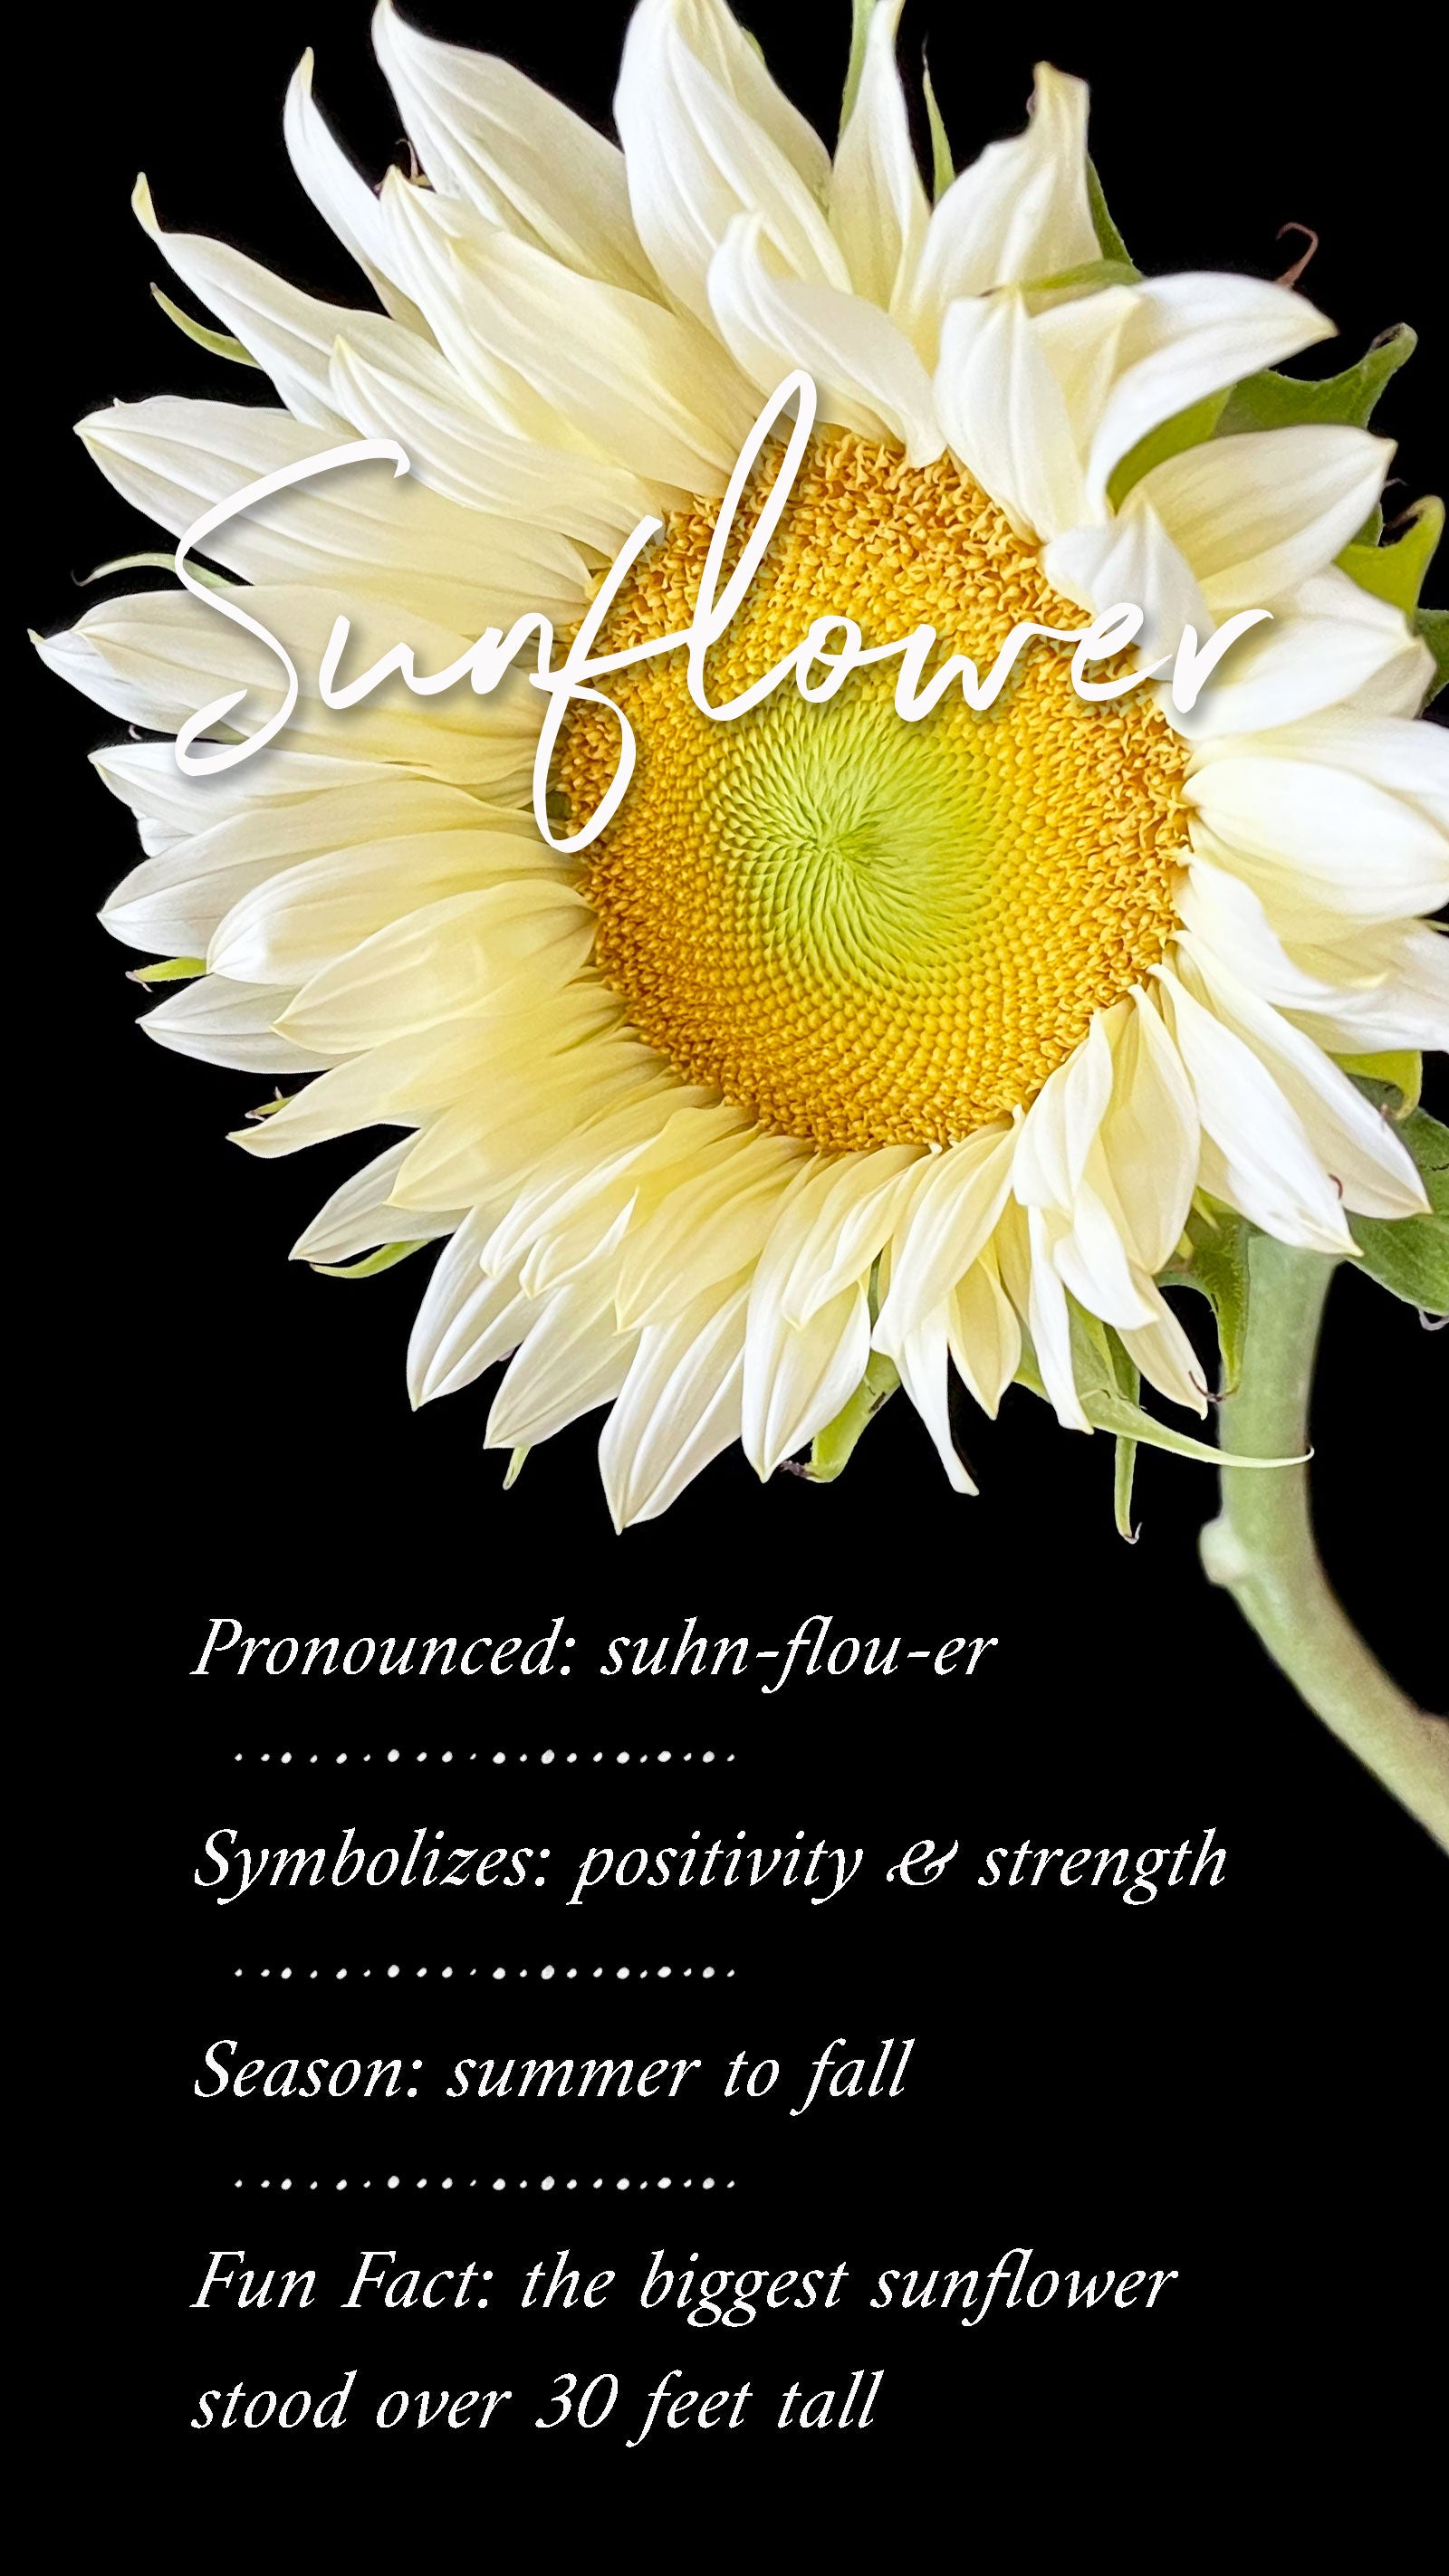  view of a white sunflower with delicate petals and a yellow textured center, set against a dark background. The word ‘Sunflower’ is elegantly written across it. Order online for plants & flowers from the best florist in Toronto near you.